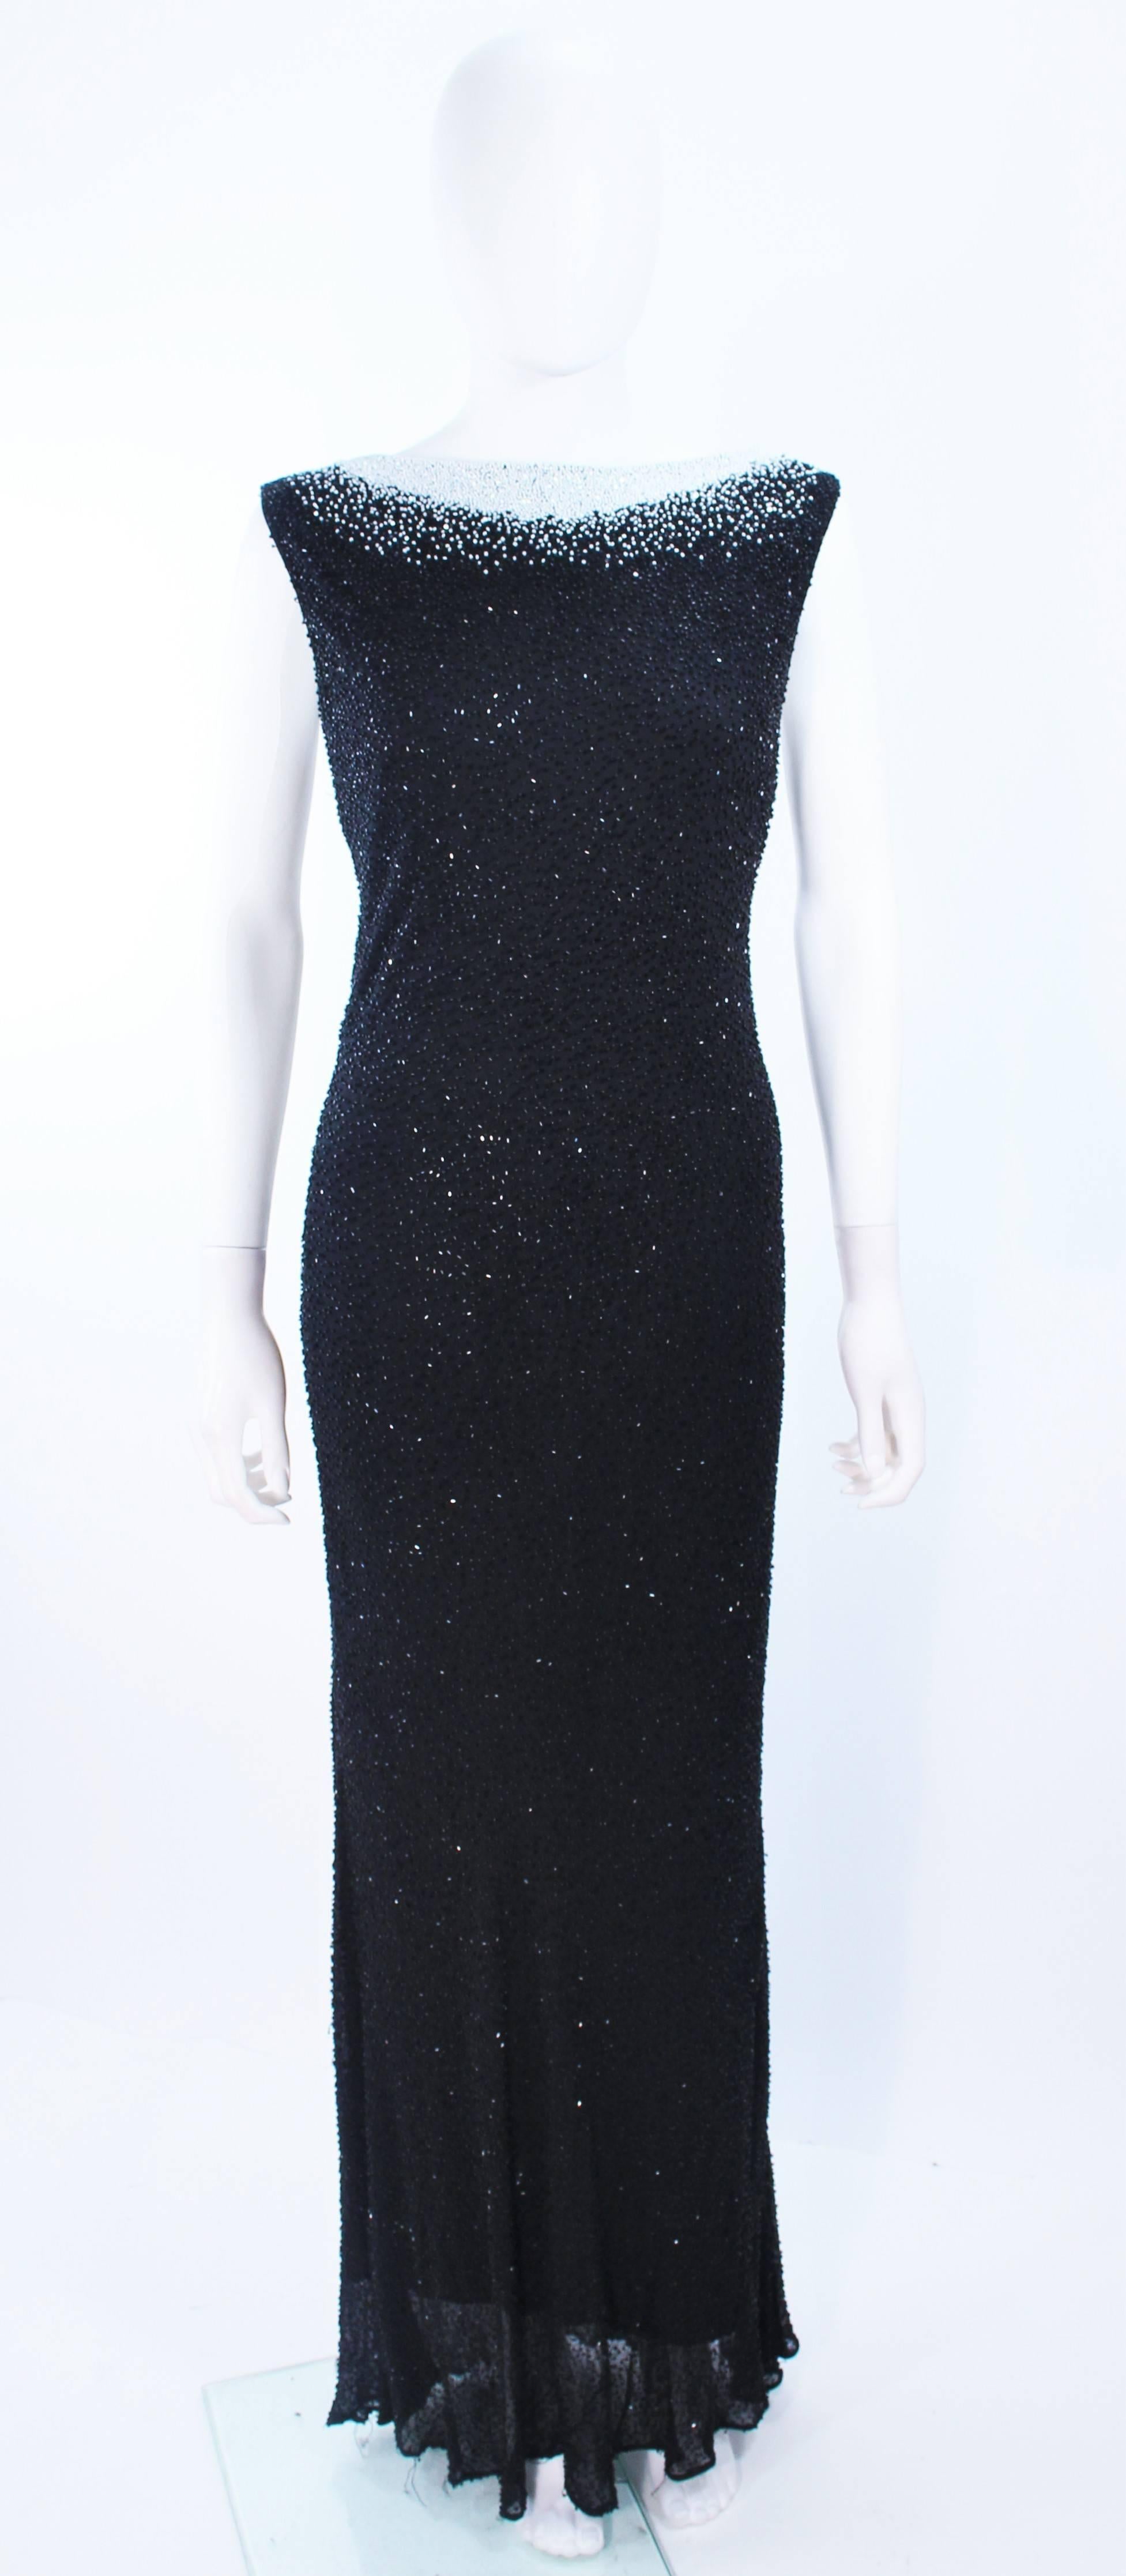 This Jovani gown is composed of a bias cut beaded fabric and features a white contrast neck. Features a v back. Pull over style. In excellent vintage condition.

**Please cross-reference measurements for personal accuracy. Size in description box